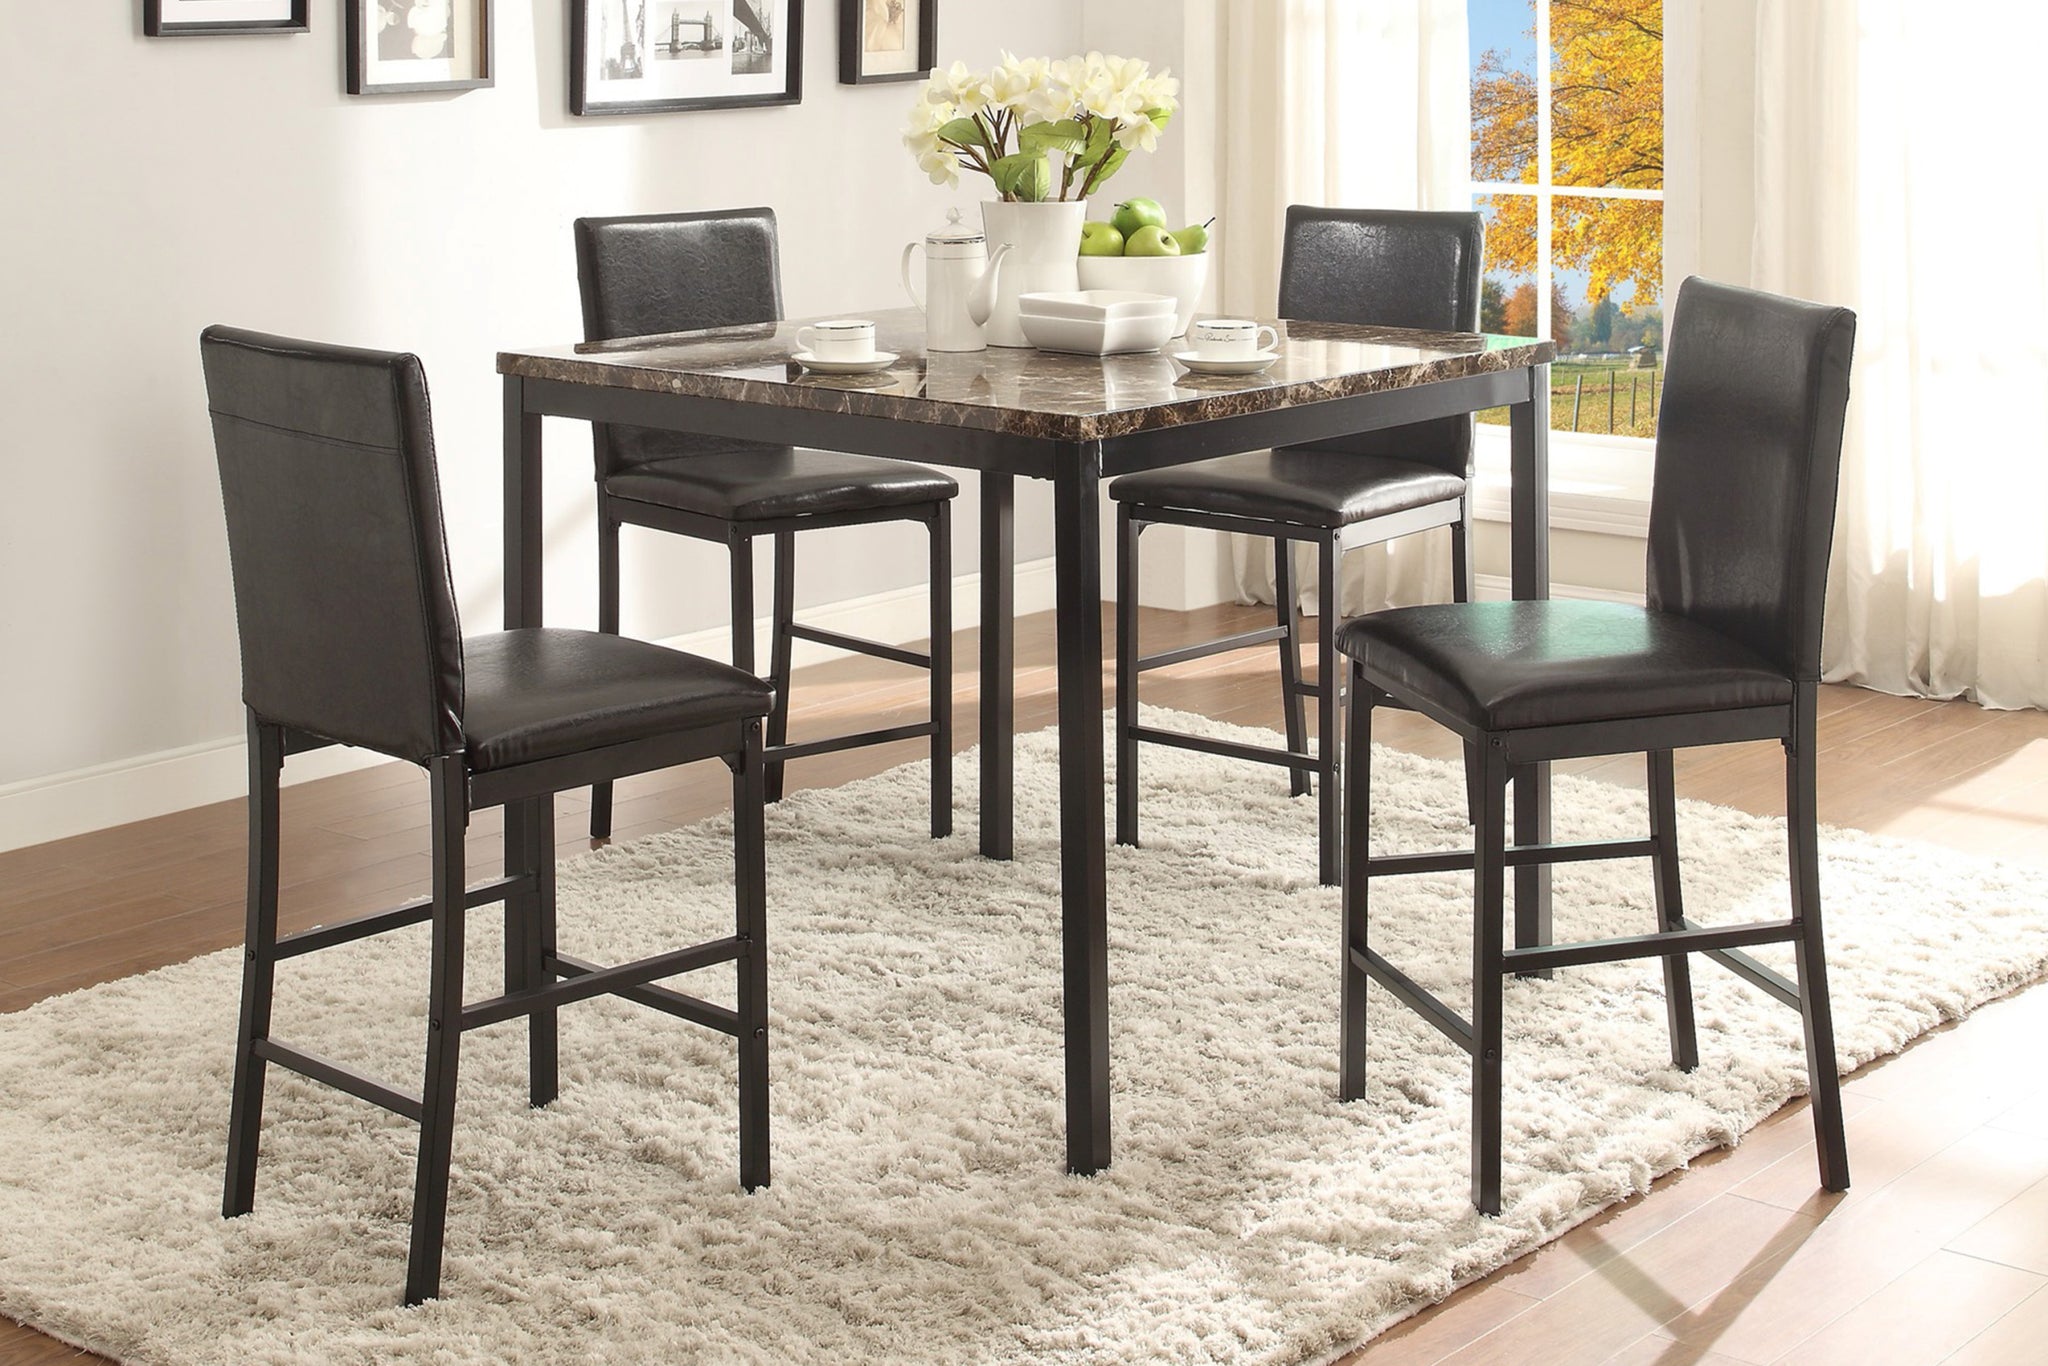 Black Metal Finish Counter Height Dining Set 5pc Faux black-seats 4-dining room-dining table with